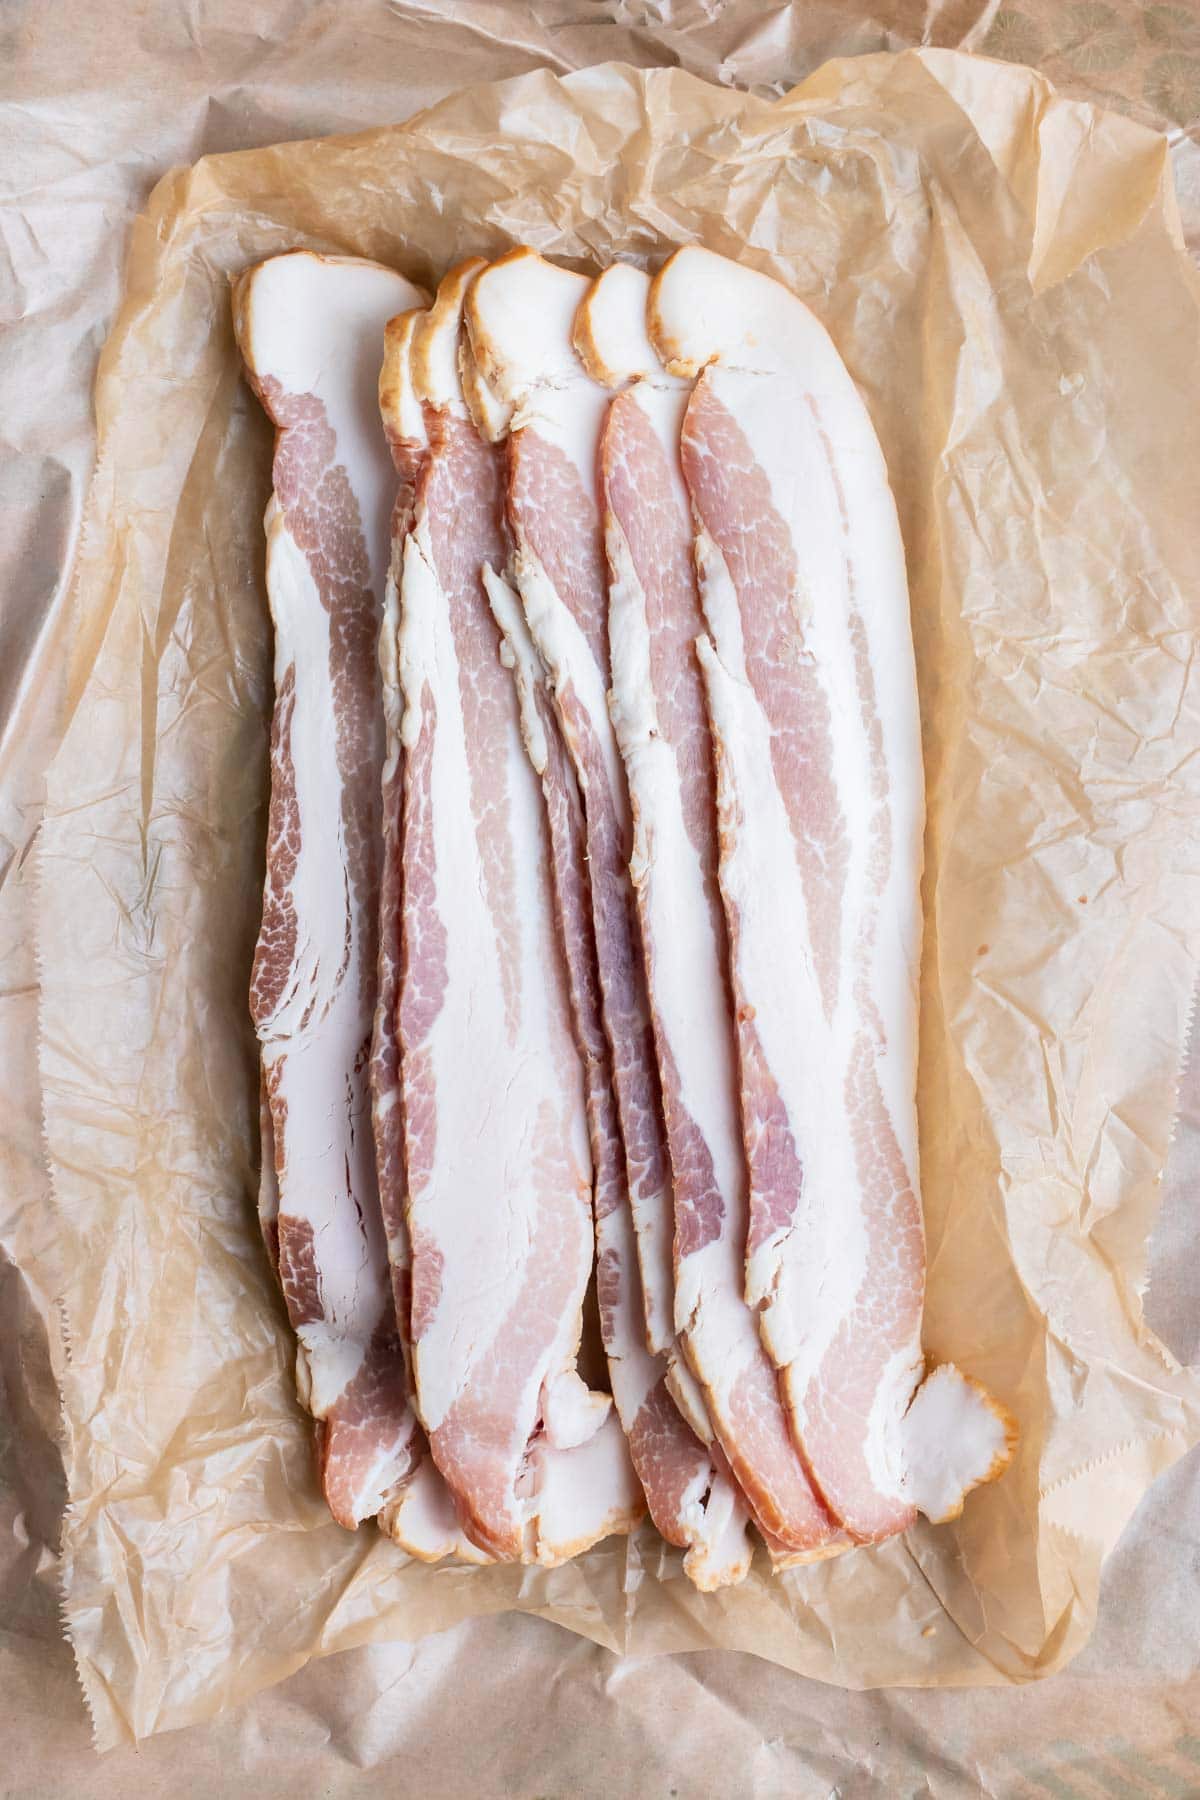 Bacon is shown on butcher paper.